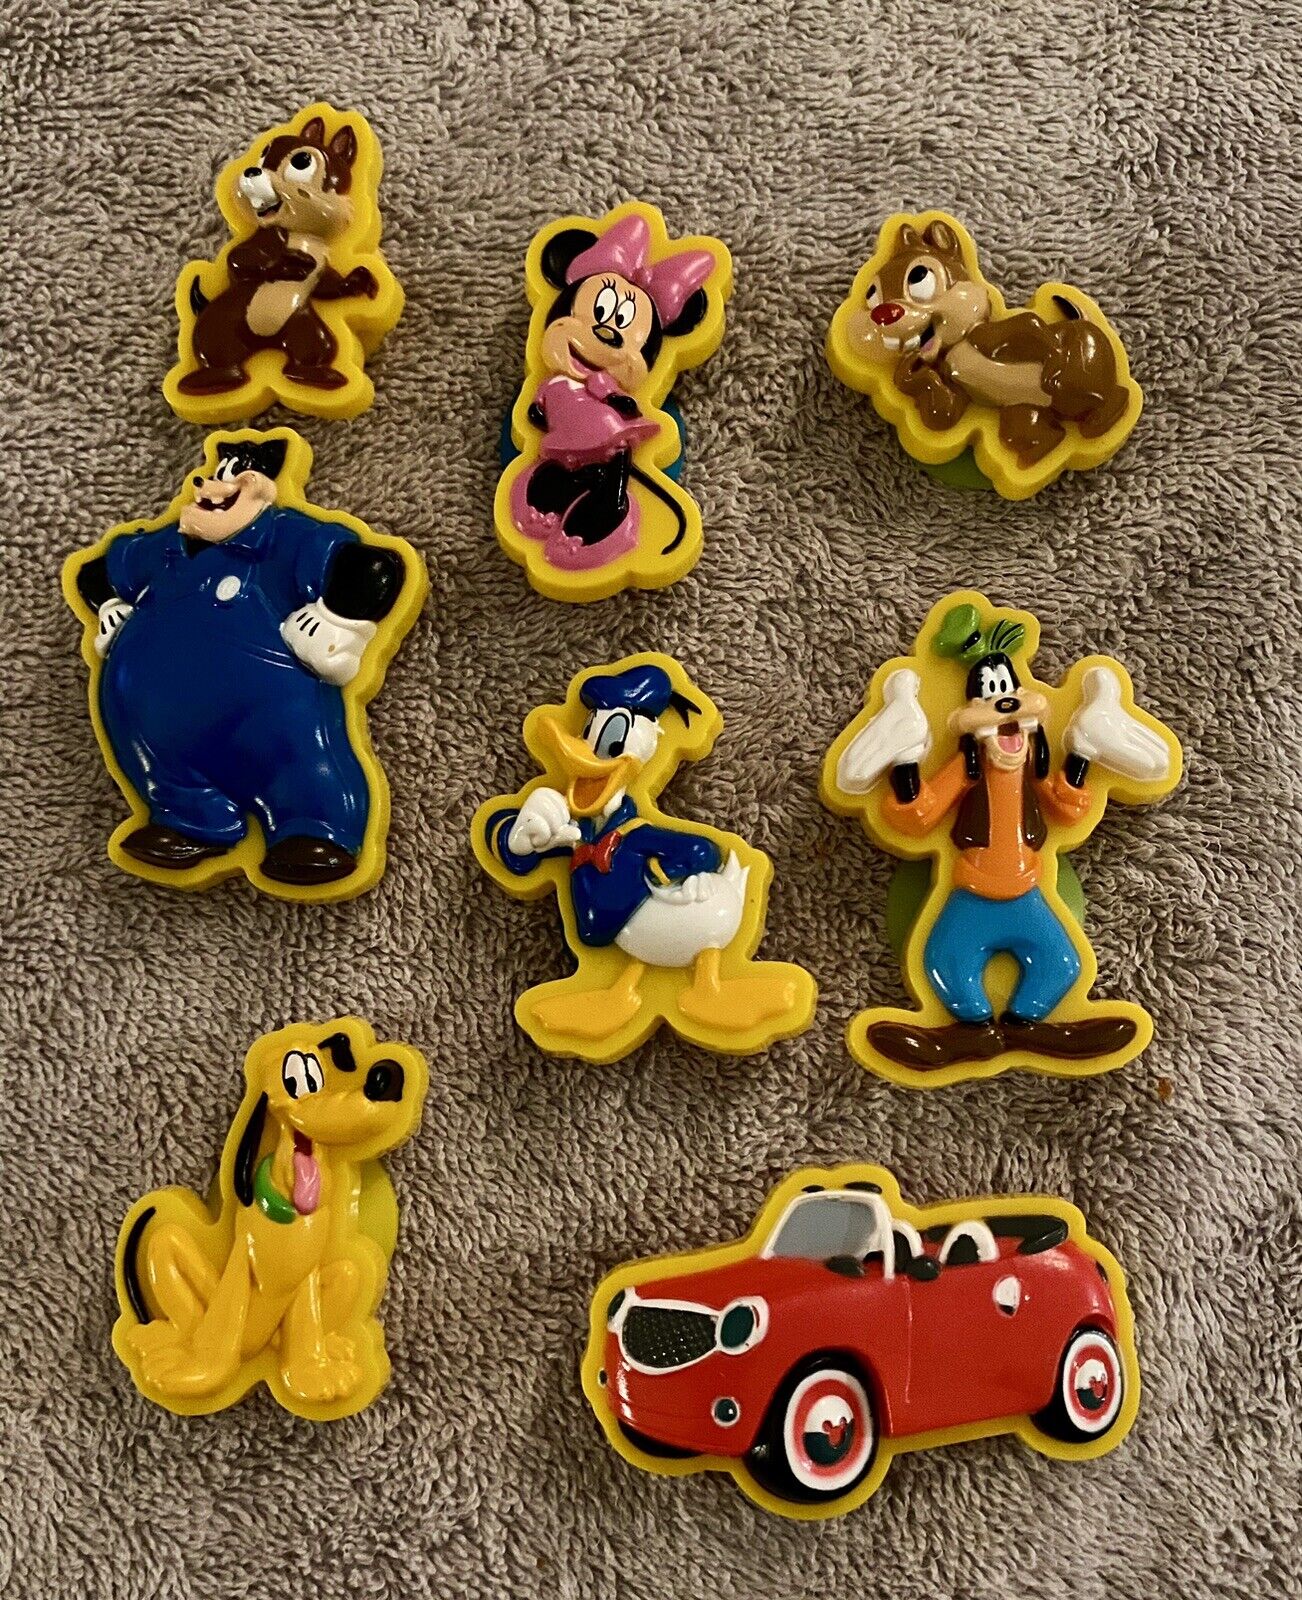 Lot of 8 Vintage Walt Disney Suction Cup Figures HARD TO FIND +Others RARE